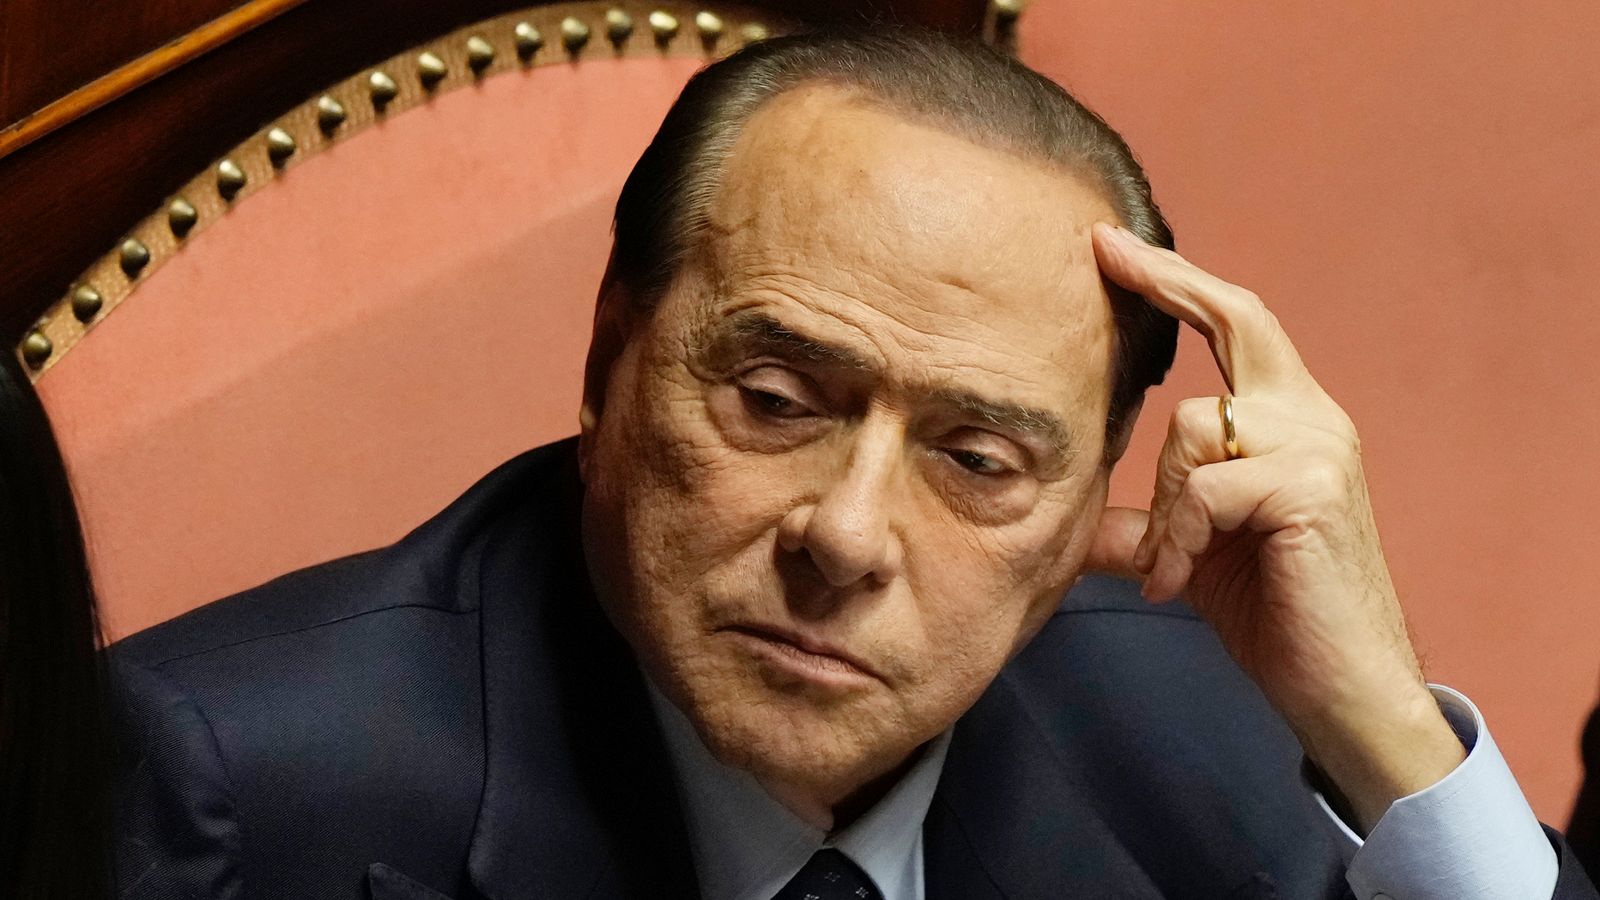 Italy's Silvio Berlusconi moved from intensive care following treatment for lung infection